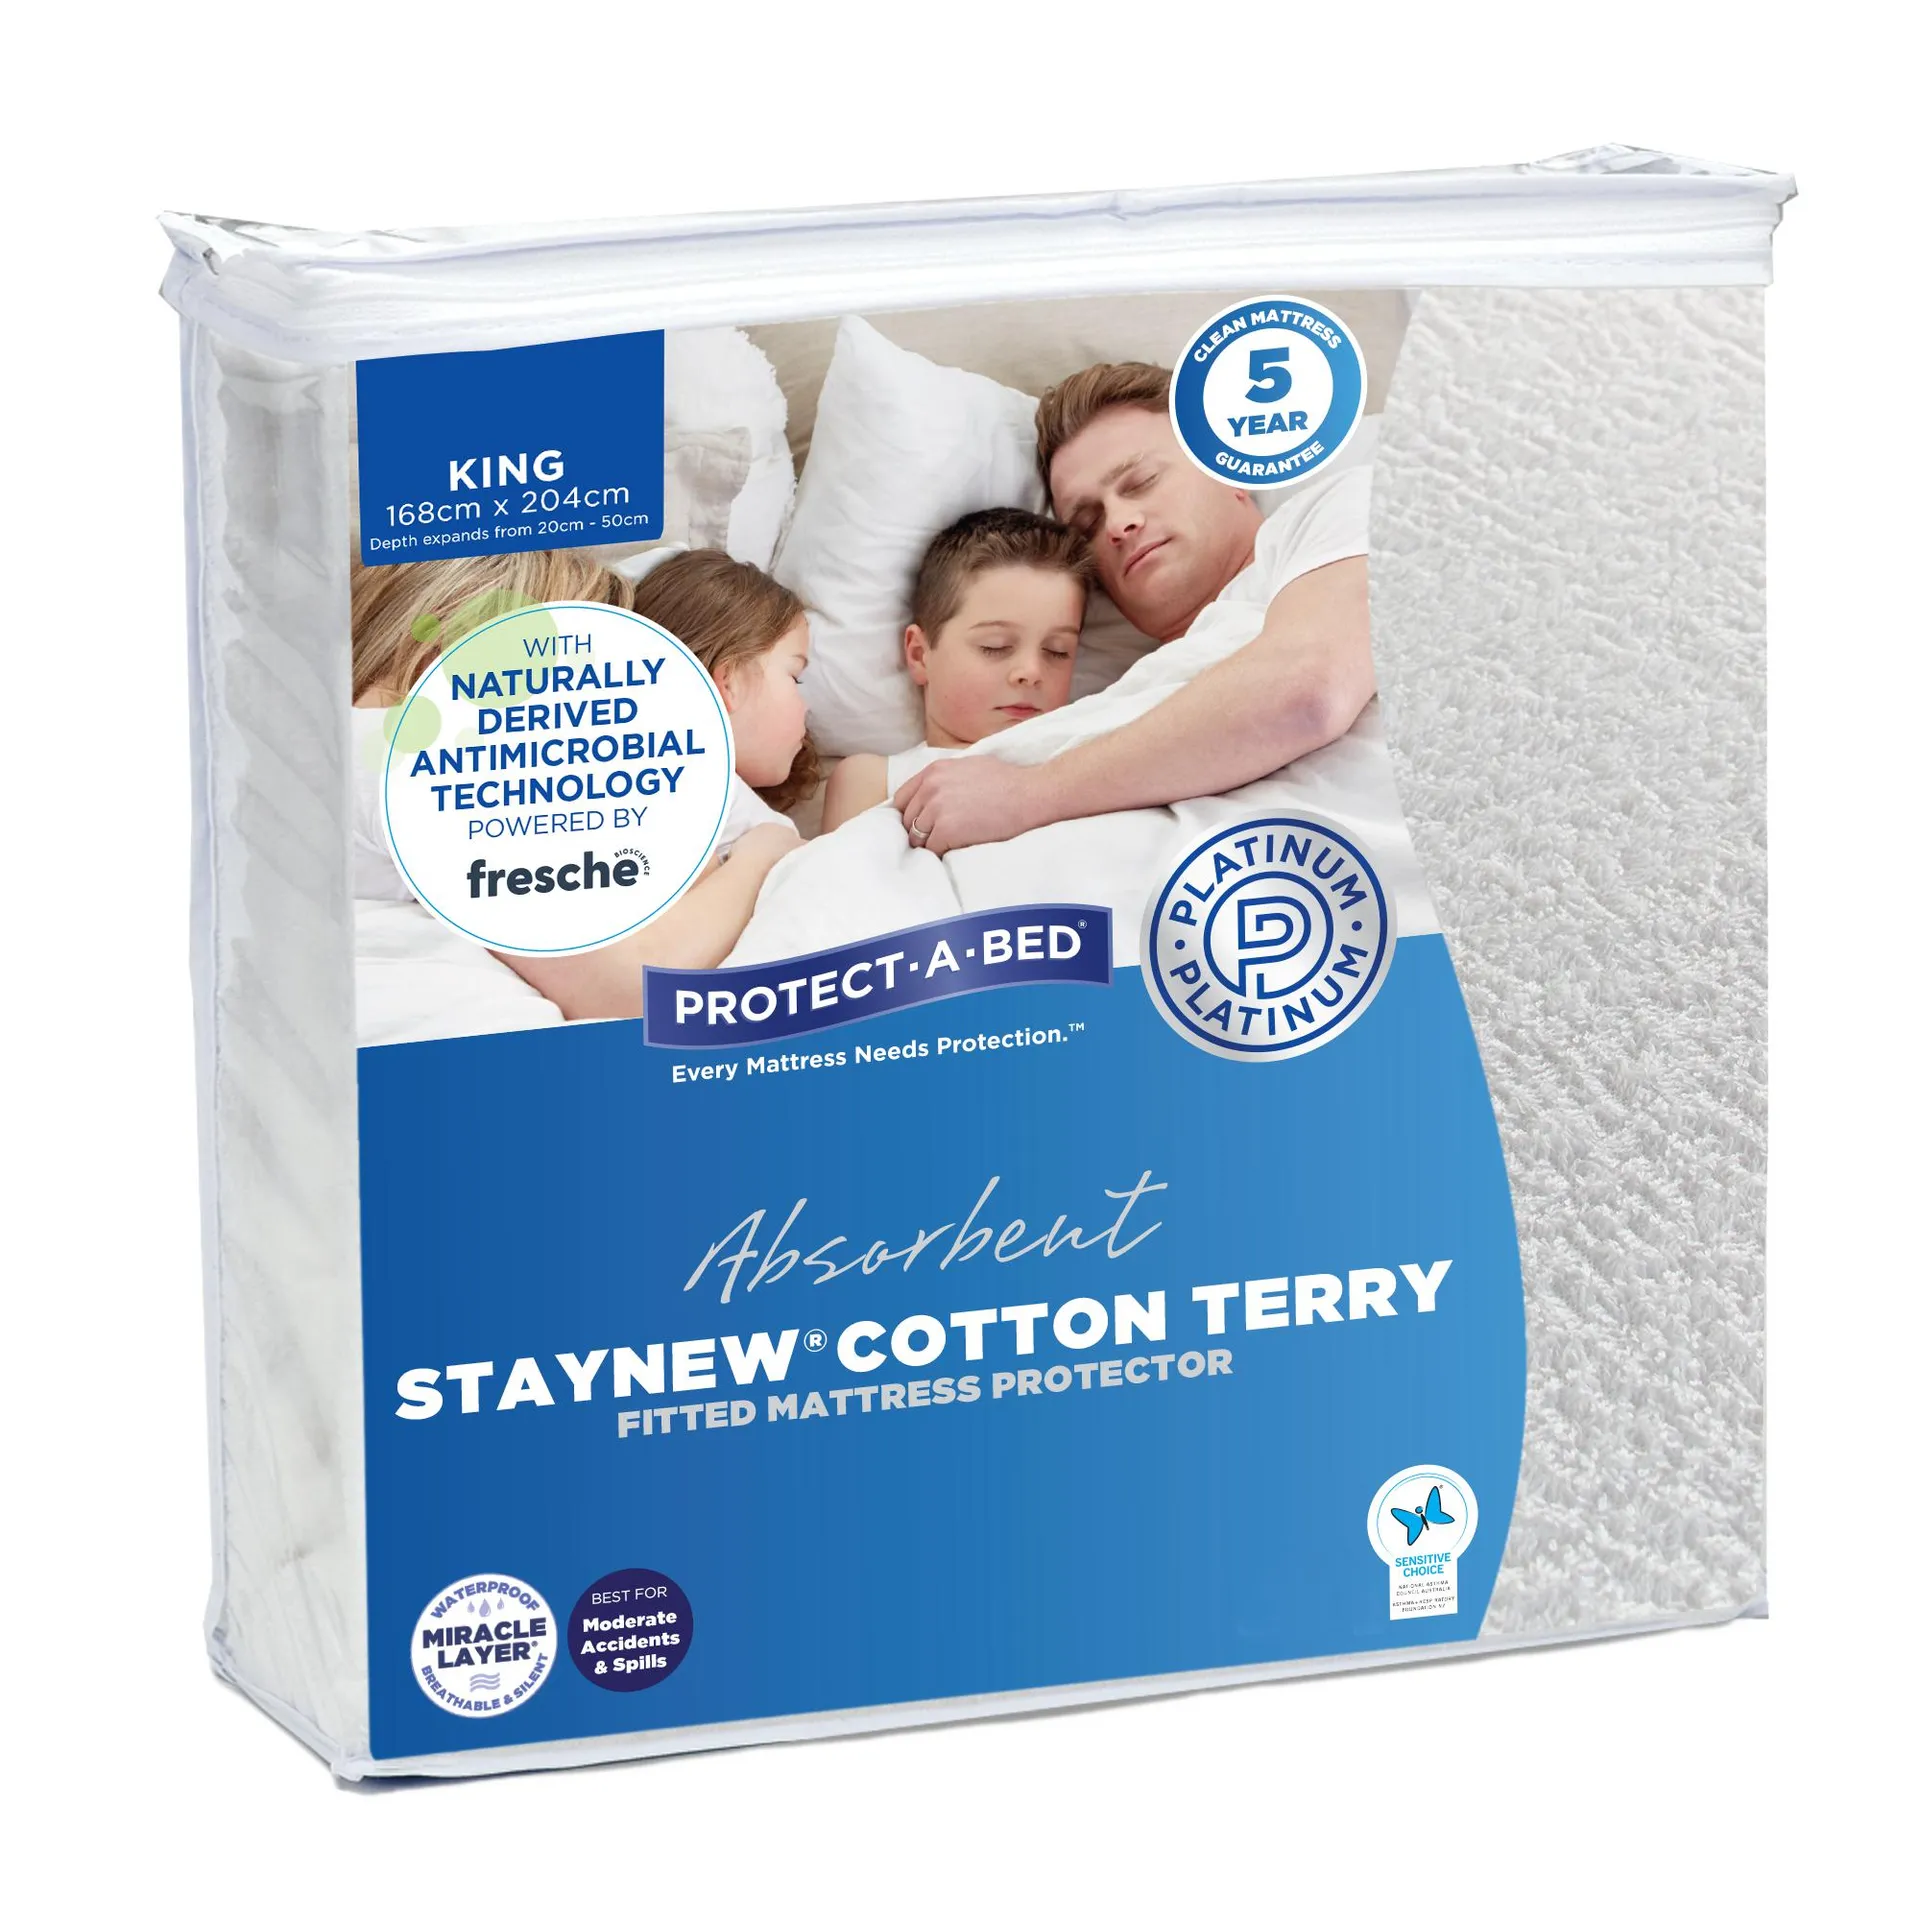 Protect-A-Bed Staynew® Cotton Terry King Mattress Protector